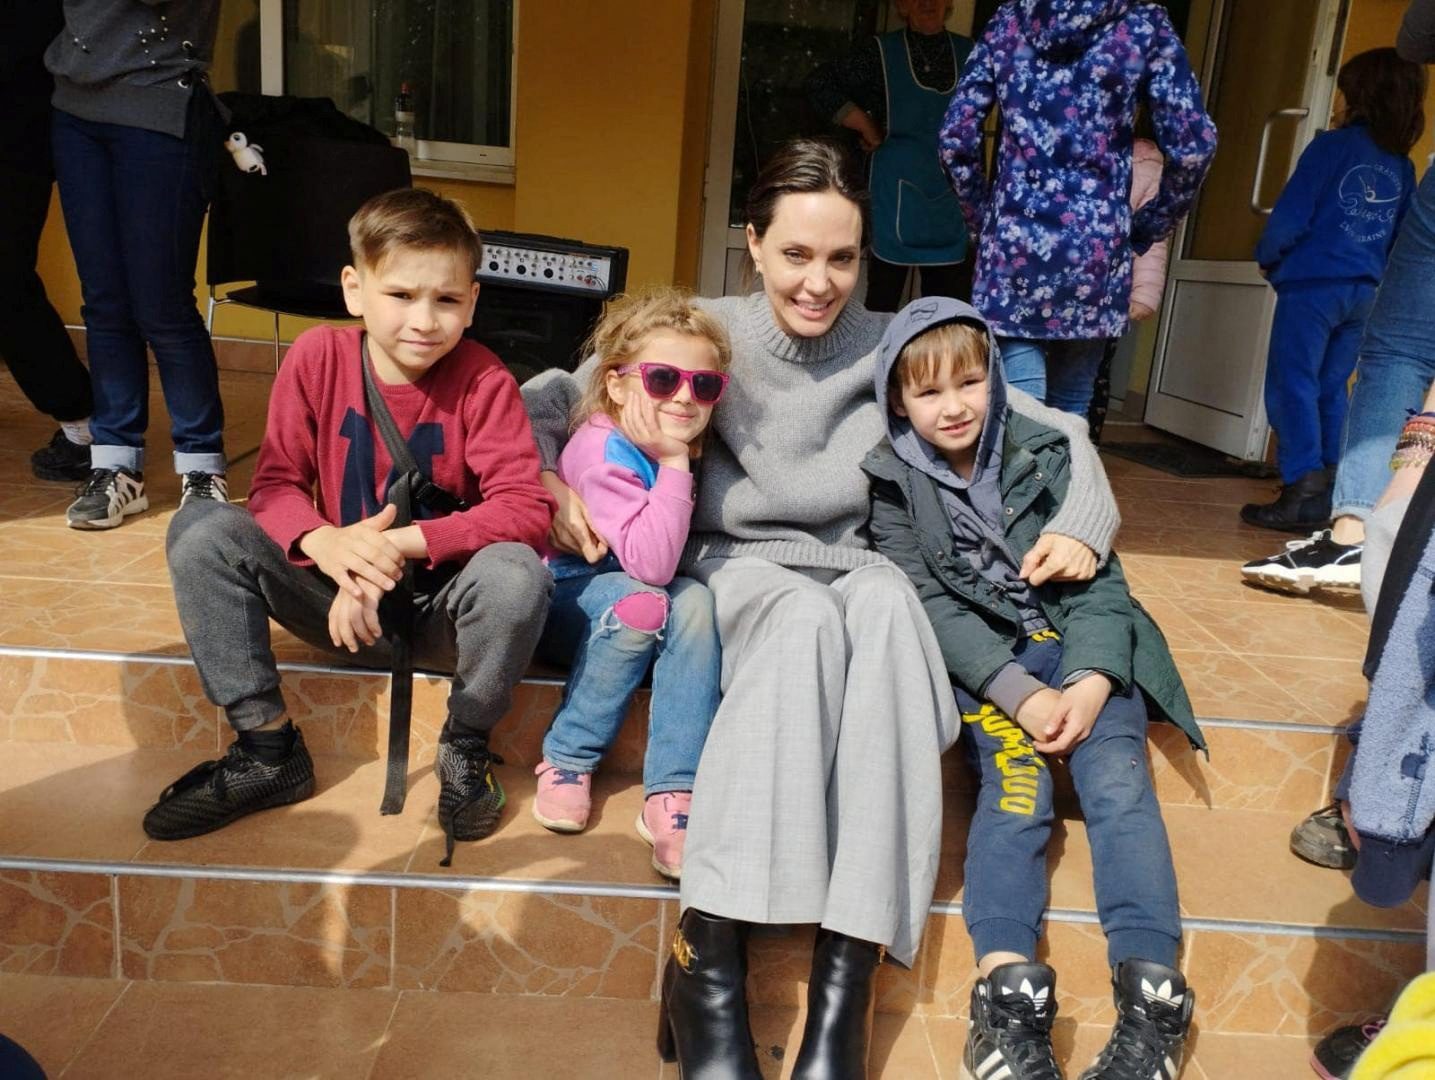 UNHCR Special Envoy Angelina Jolie poses for a picture with children, as Russia's attack on Ukraine continues, in Lviv, Ukraine April 30, 2022.